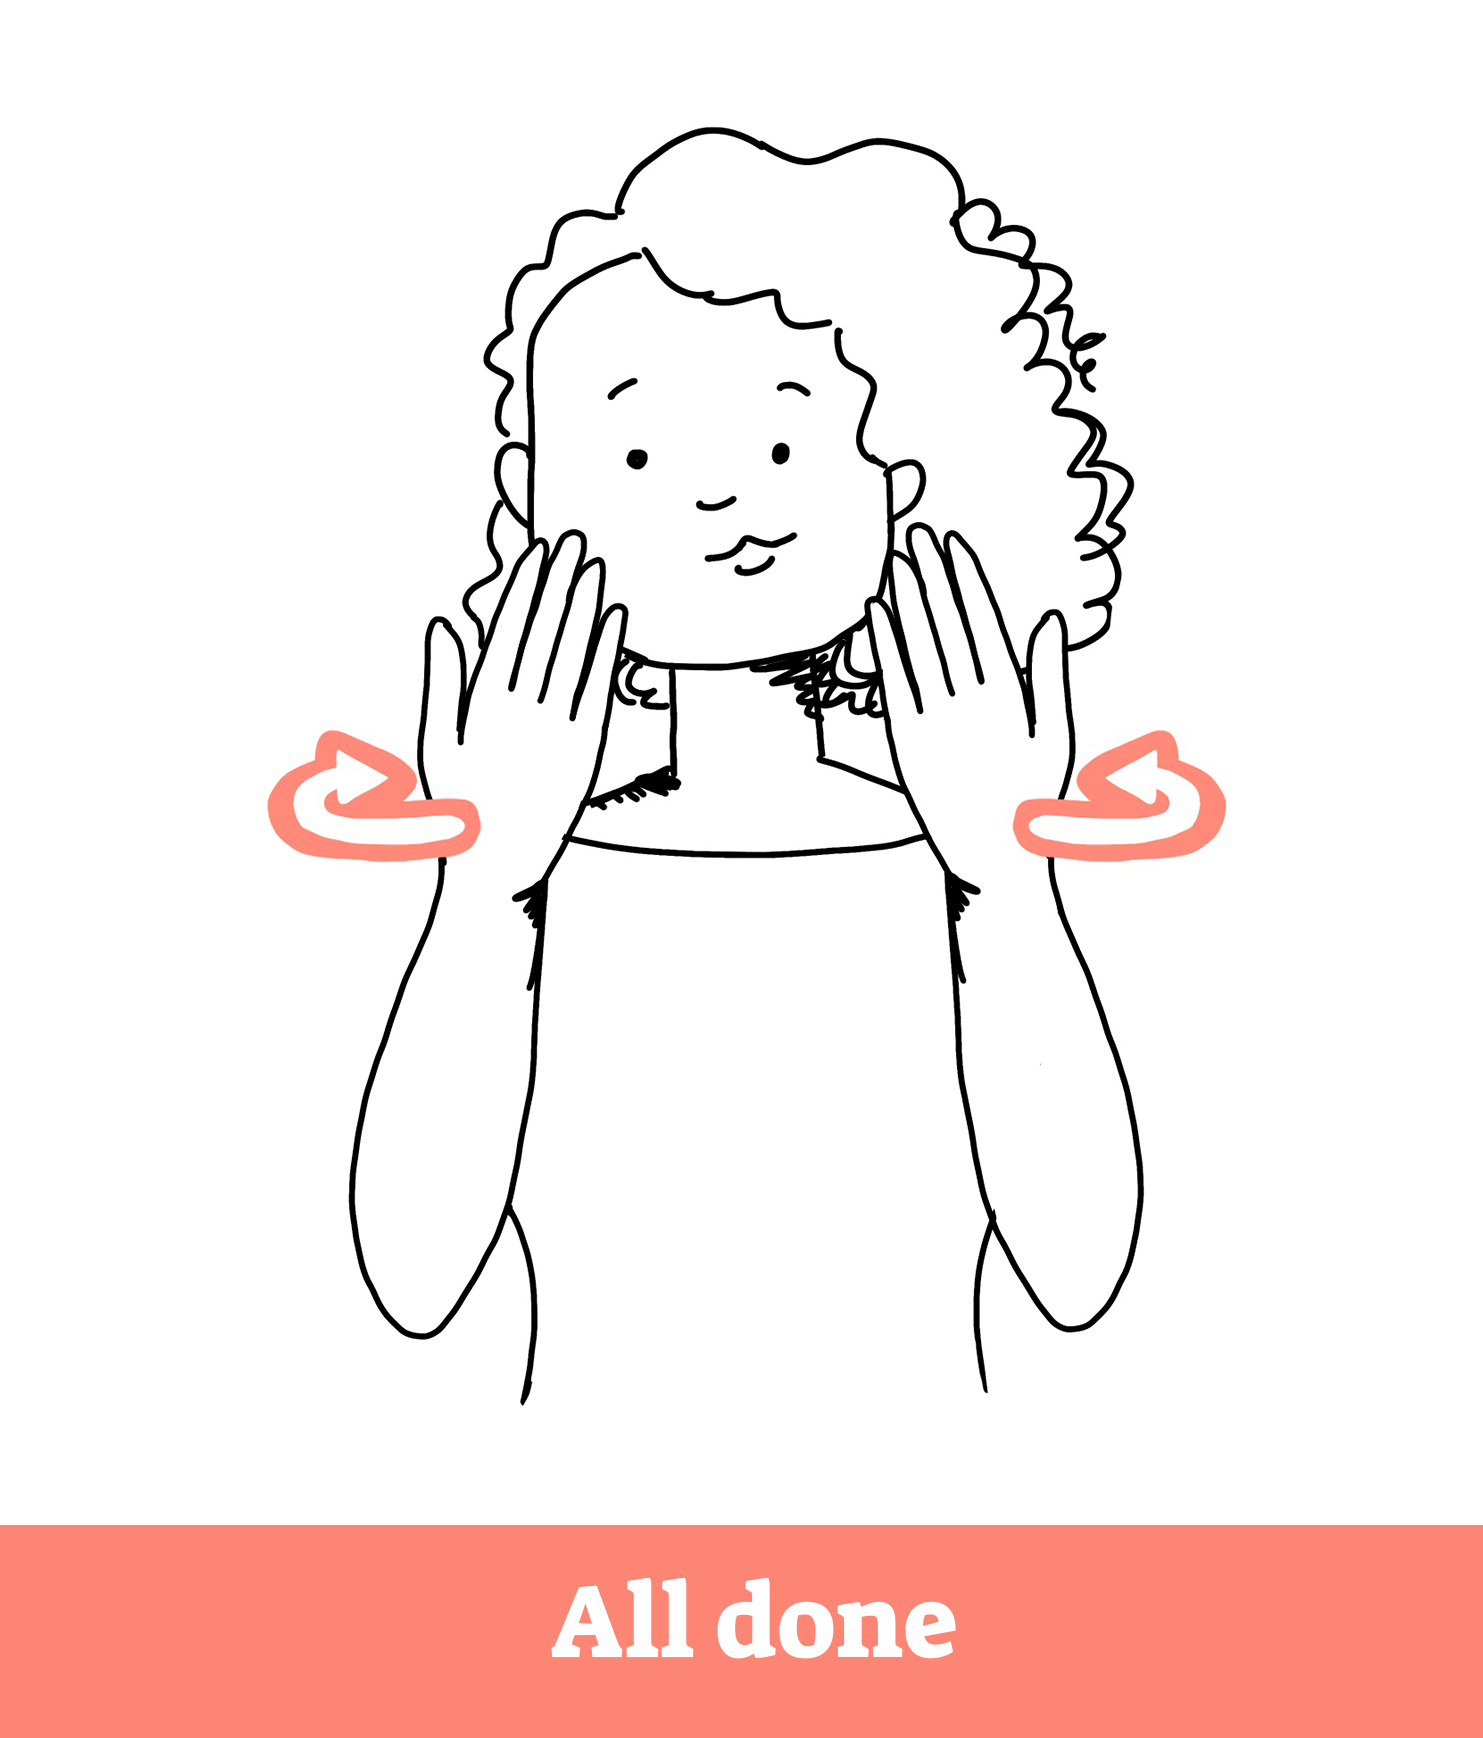 Animation of baby sign language sign for the words "all done".